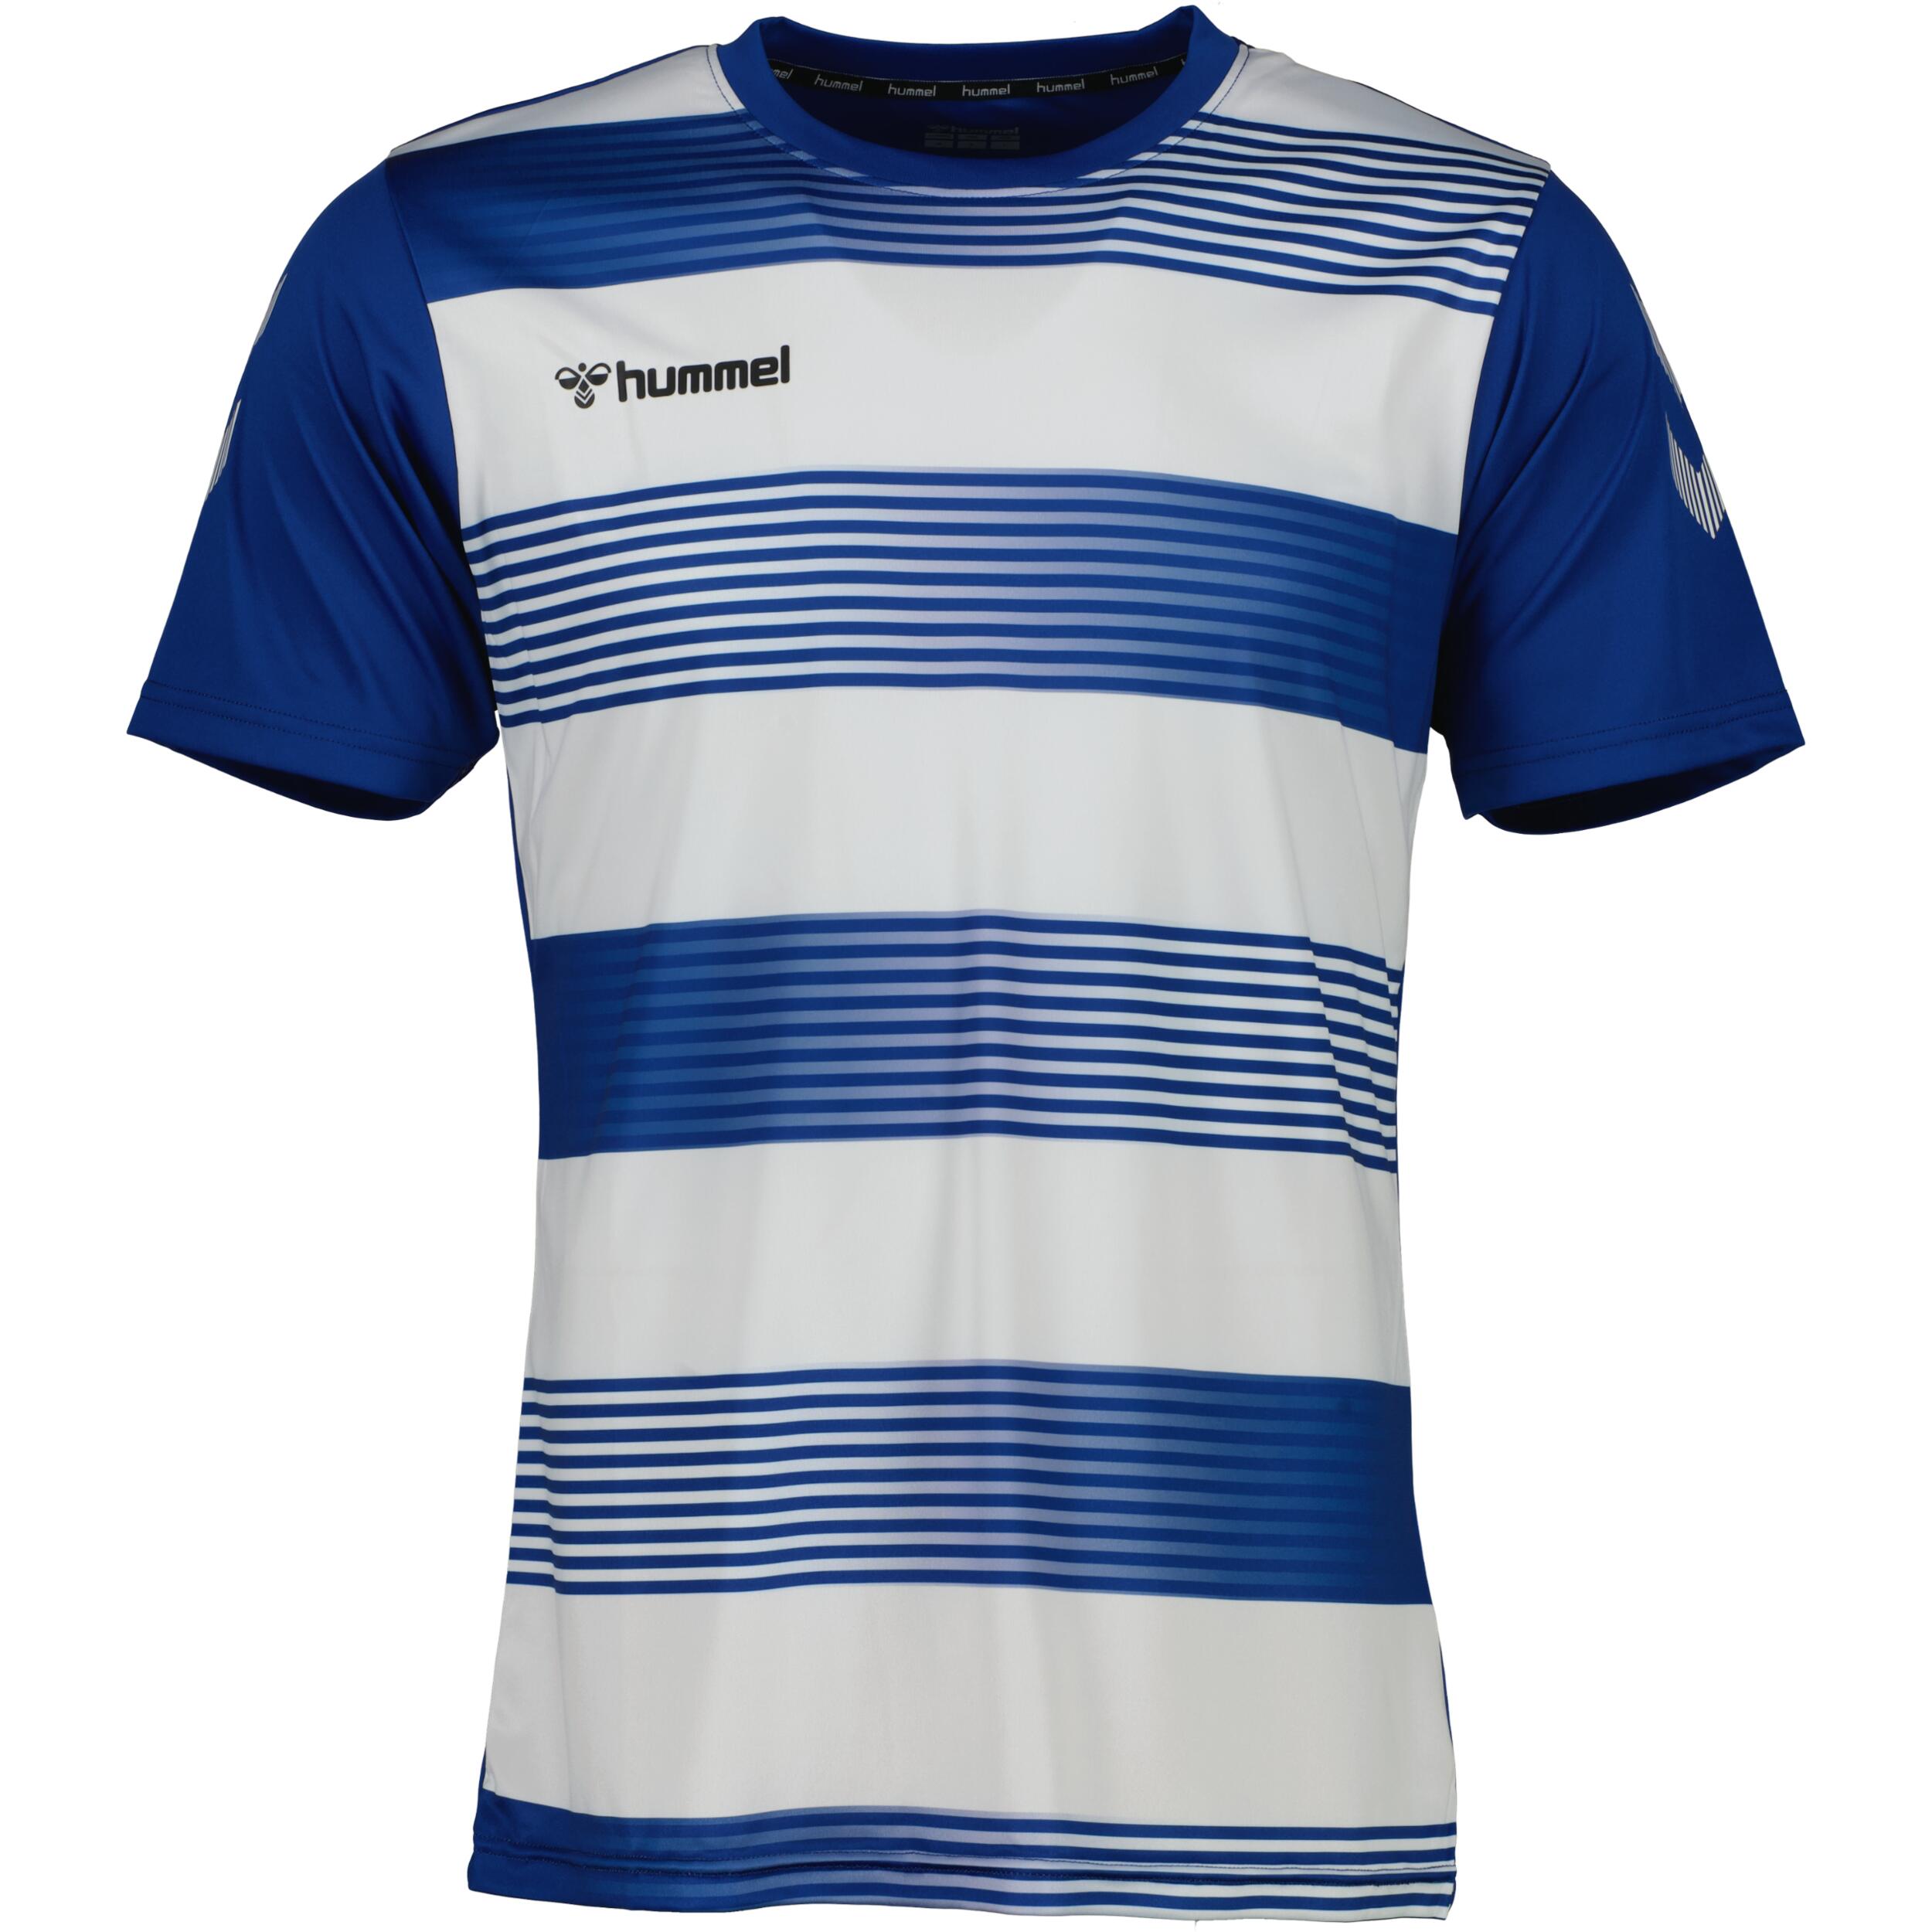 Hoop jersey for juniors, great for football, in true blue 1/3